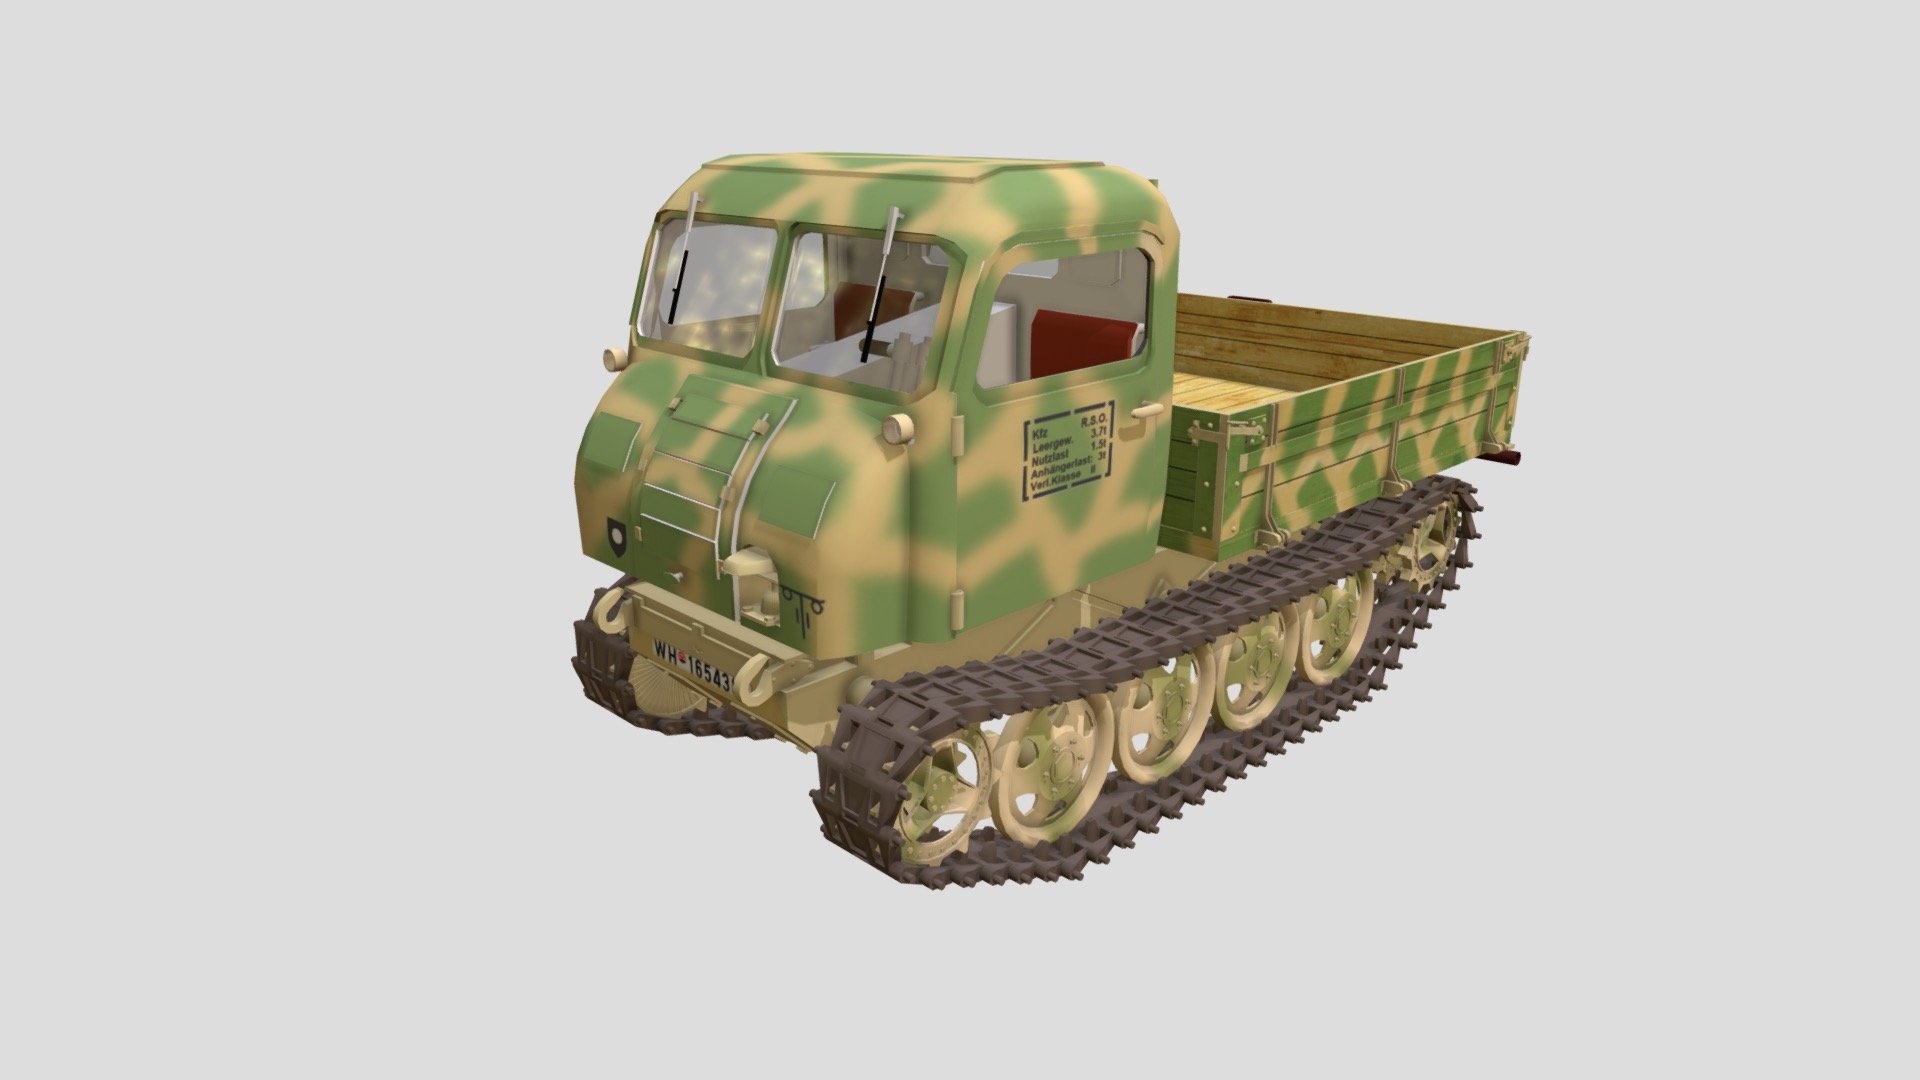 Raupenschlepper Ost (German: “Caterpillar Tractor East”, more commonly abbreviated to RSO) was a fully tracked, lightweight vehicle used by the Wehrmacht in World War II.

二戰德國東線全地形載重牽引車，製作R.S.O.載重車的系列作之一。 - Steyr RSO/01 - 3D model by Basic Hsu (@Hsu.Pei.Ge) 3d model